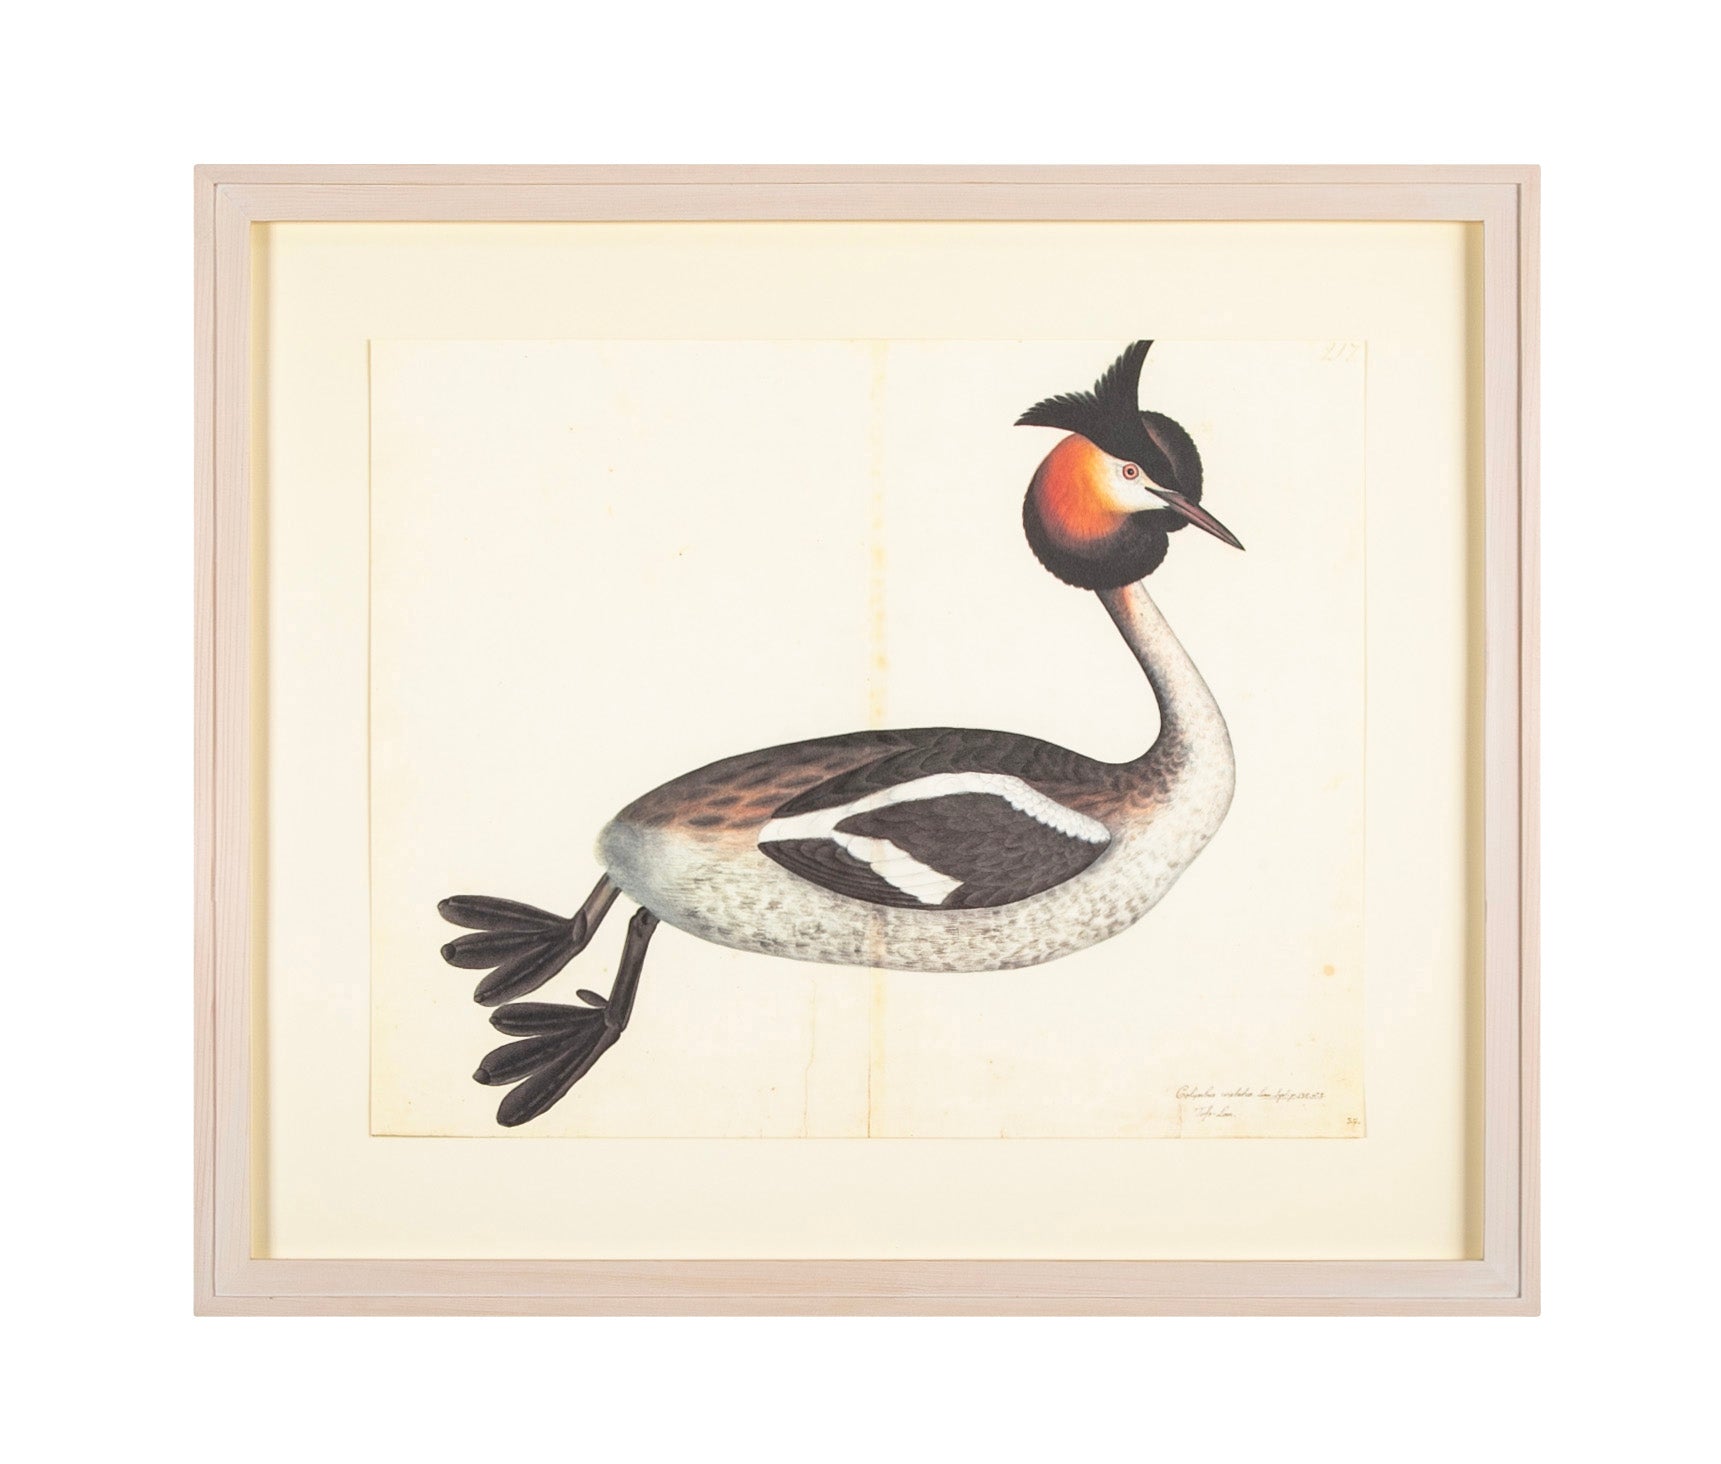 Offset Lithograph of a "Great Crested Grebe, PL 34" from the "The Great Bird Book" by Olof Rudbeck The Younger (1660-1740)